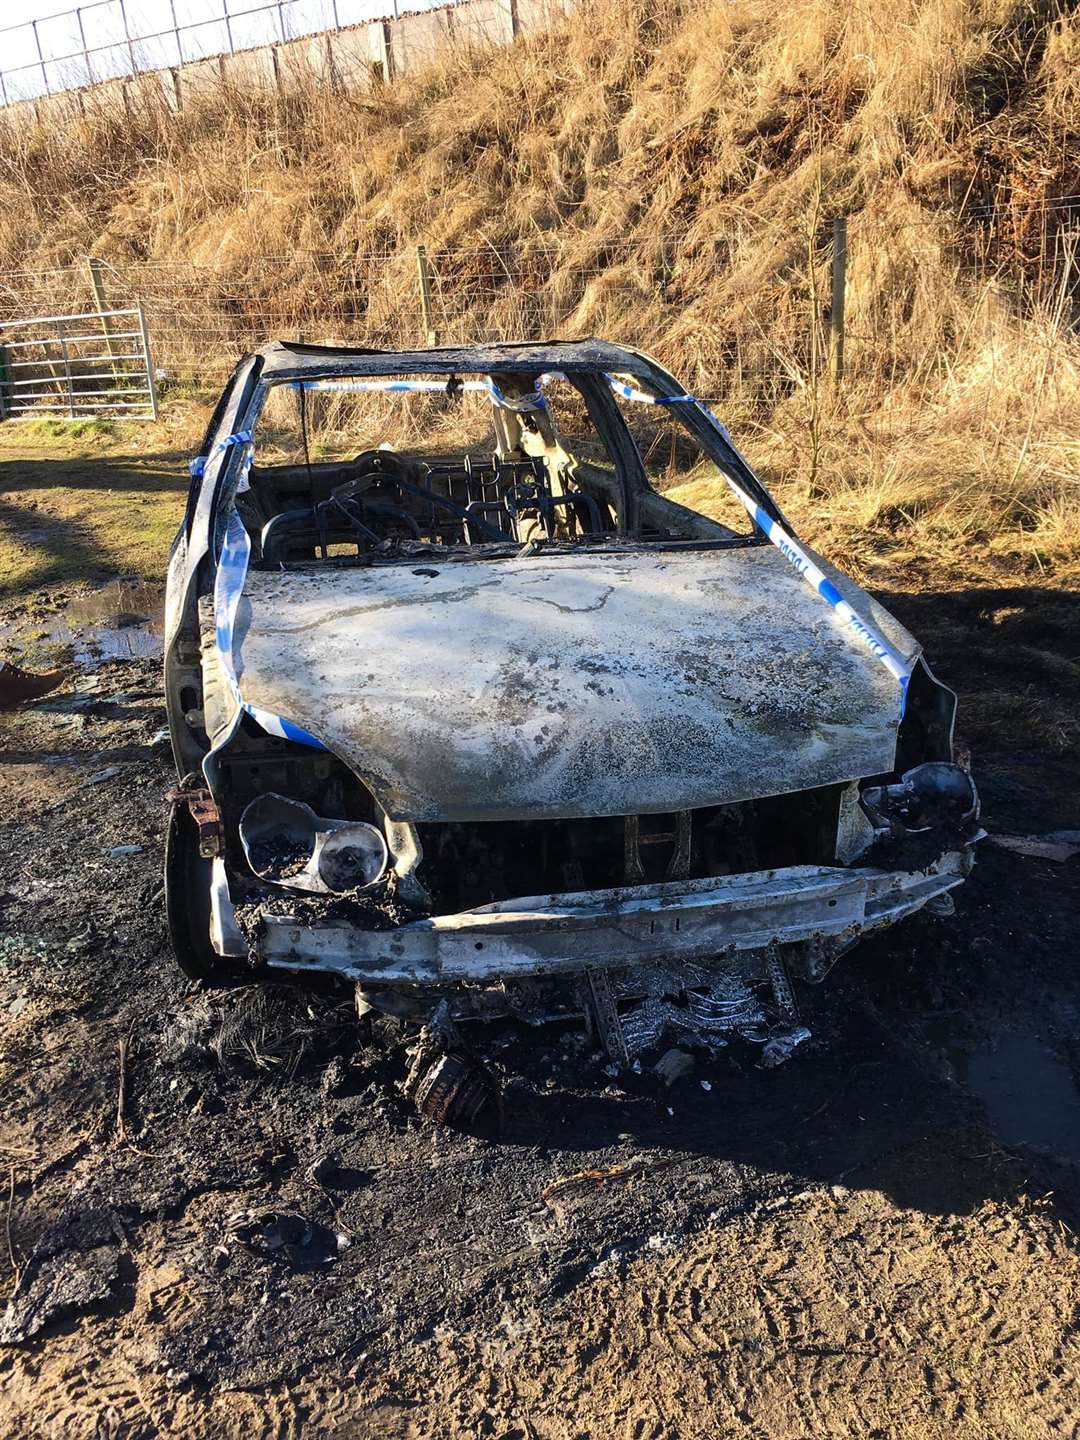 The vehicle was found burnt out near Inverurie